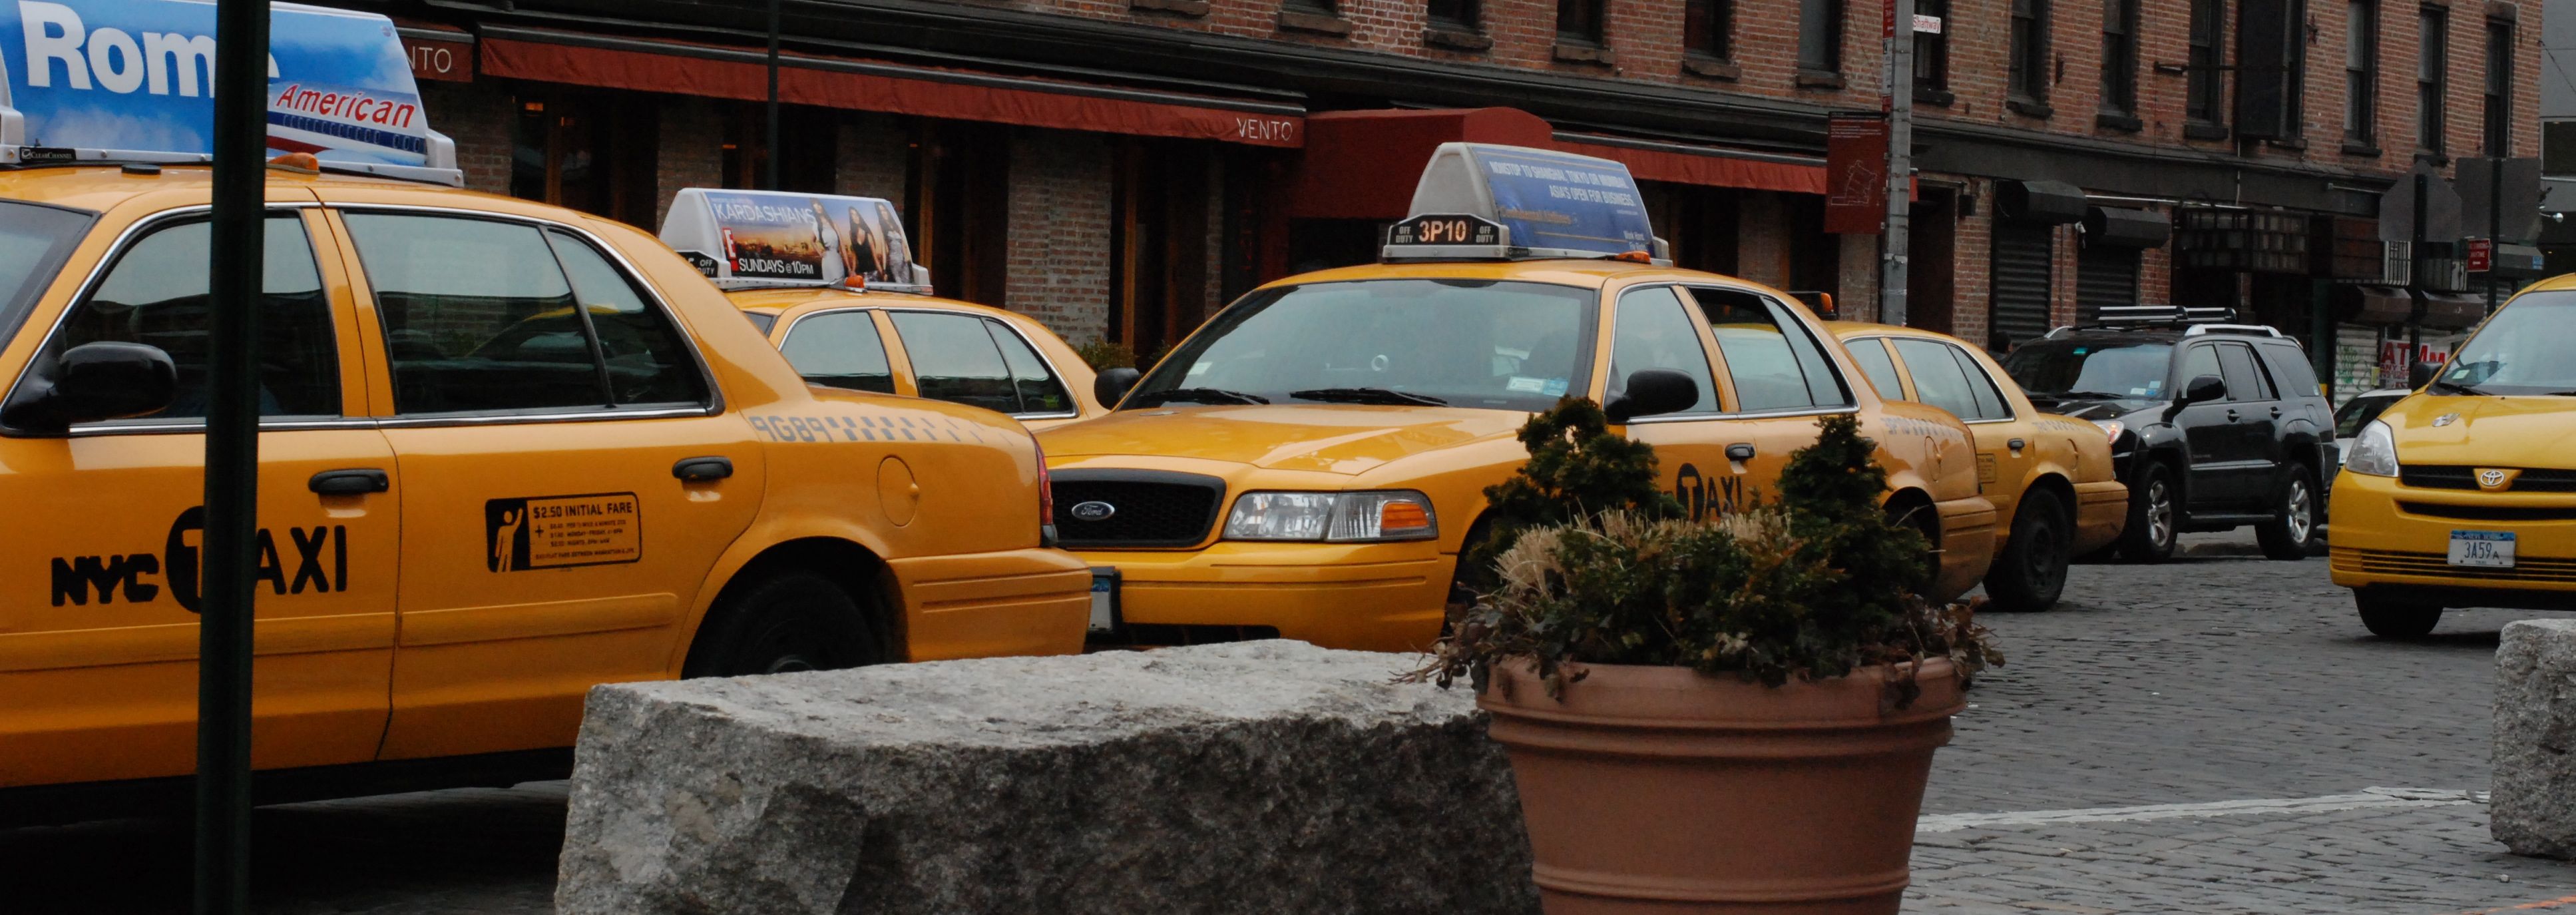 taxis in new york